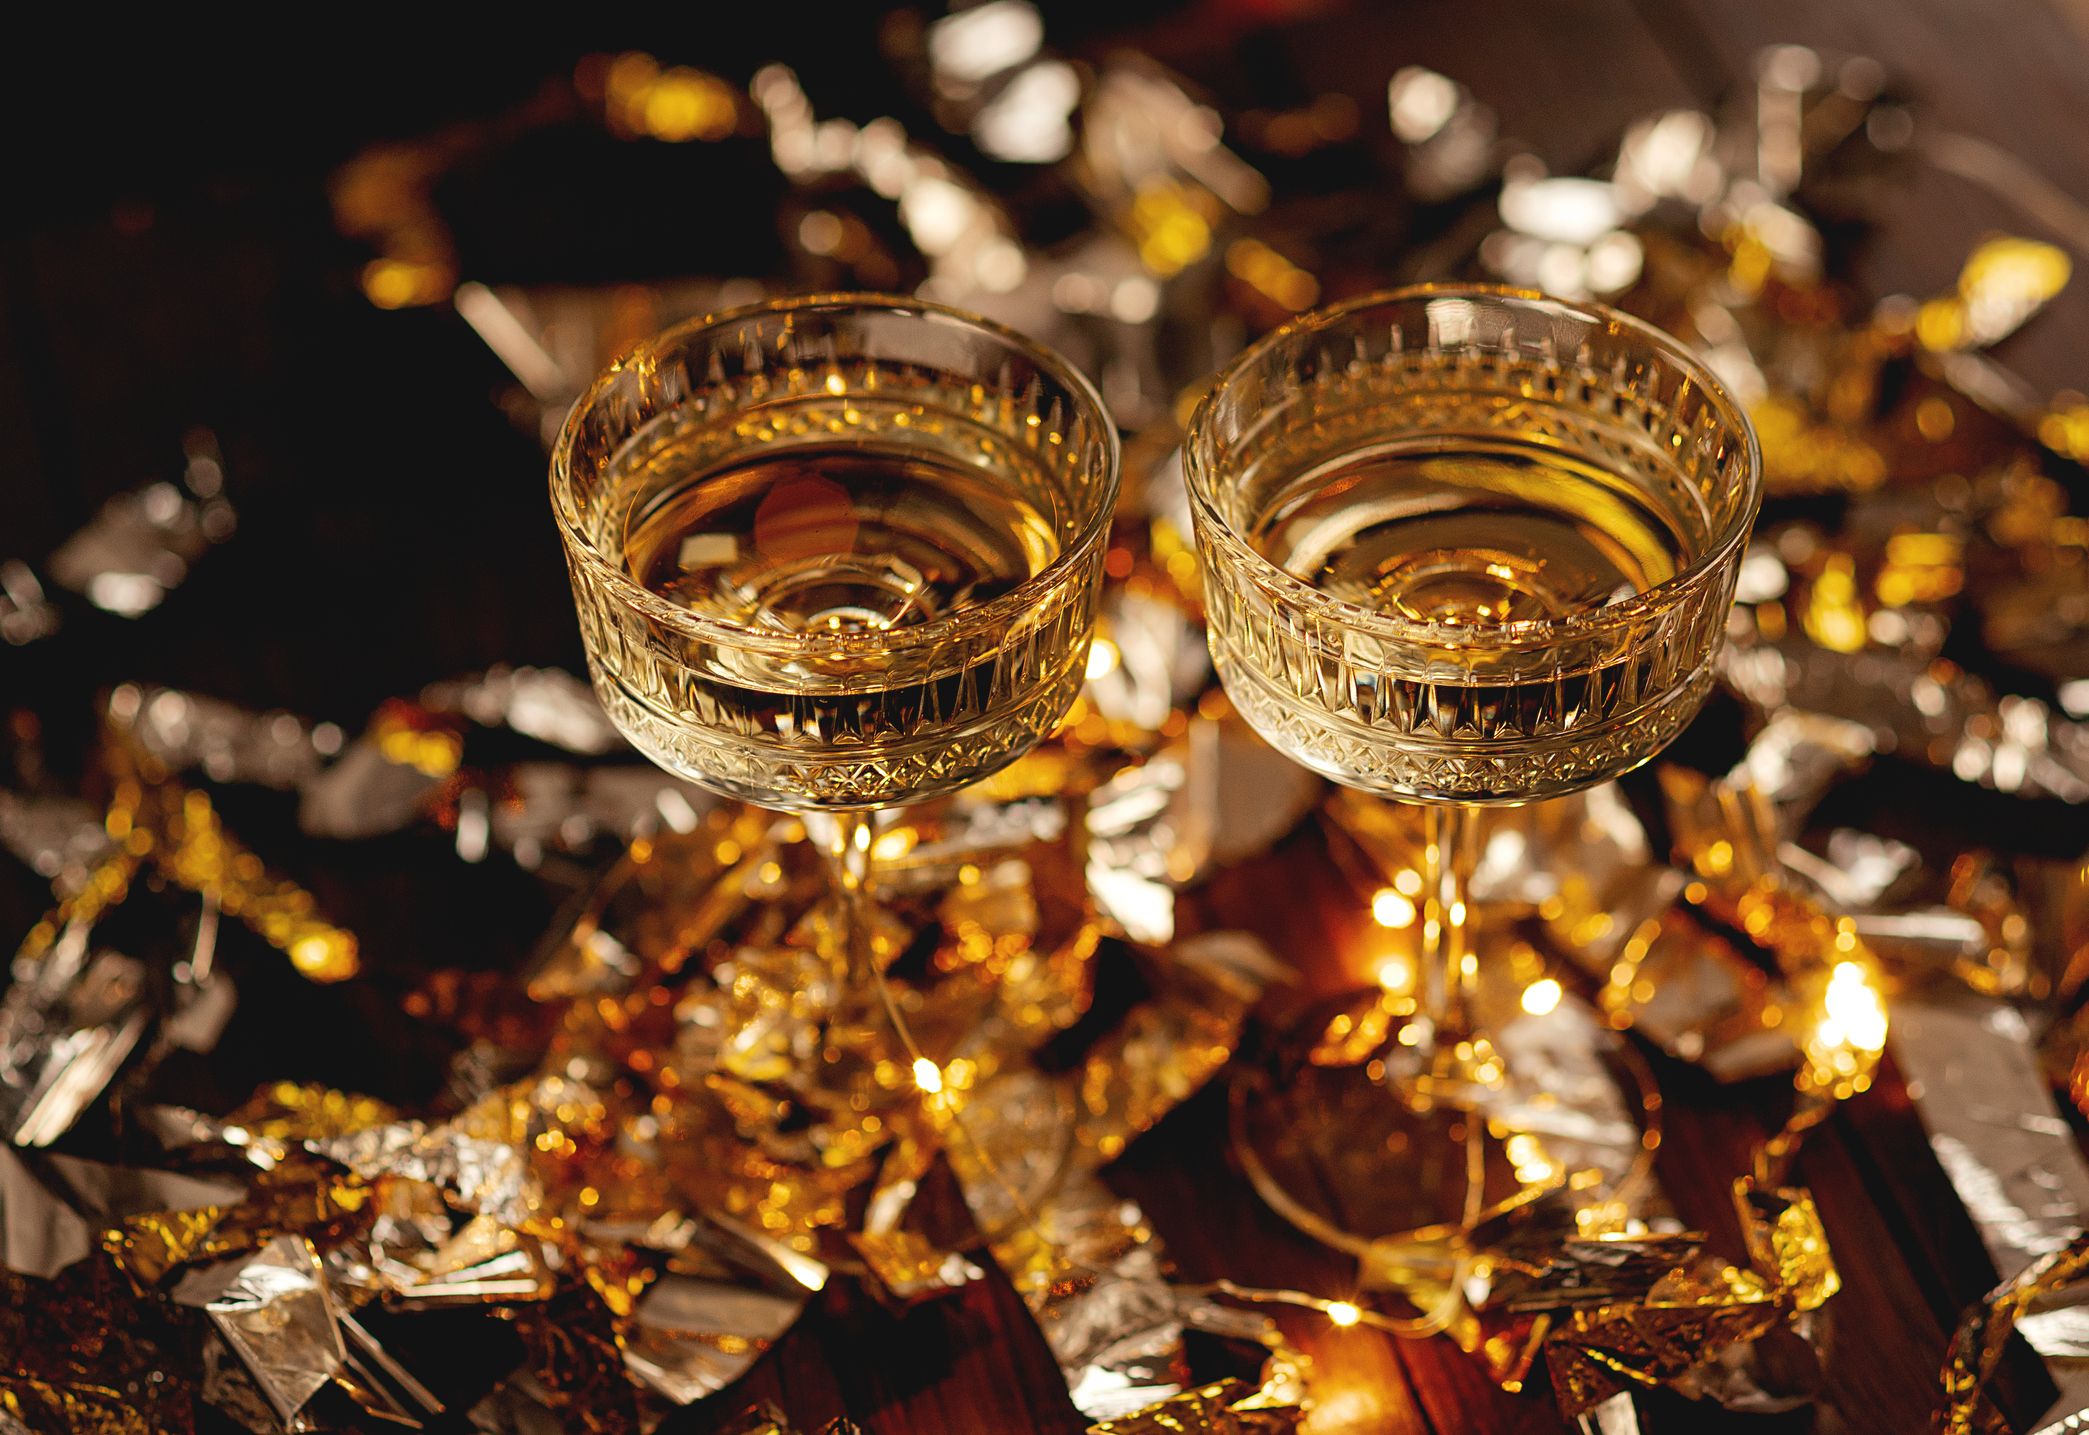 https://hips.hearstapps.com/hmg-prod/images/new-year-greeting-card-champagne-vintage-glasses-royalty-free-image-1702050620.jpg